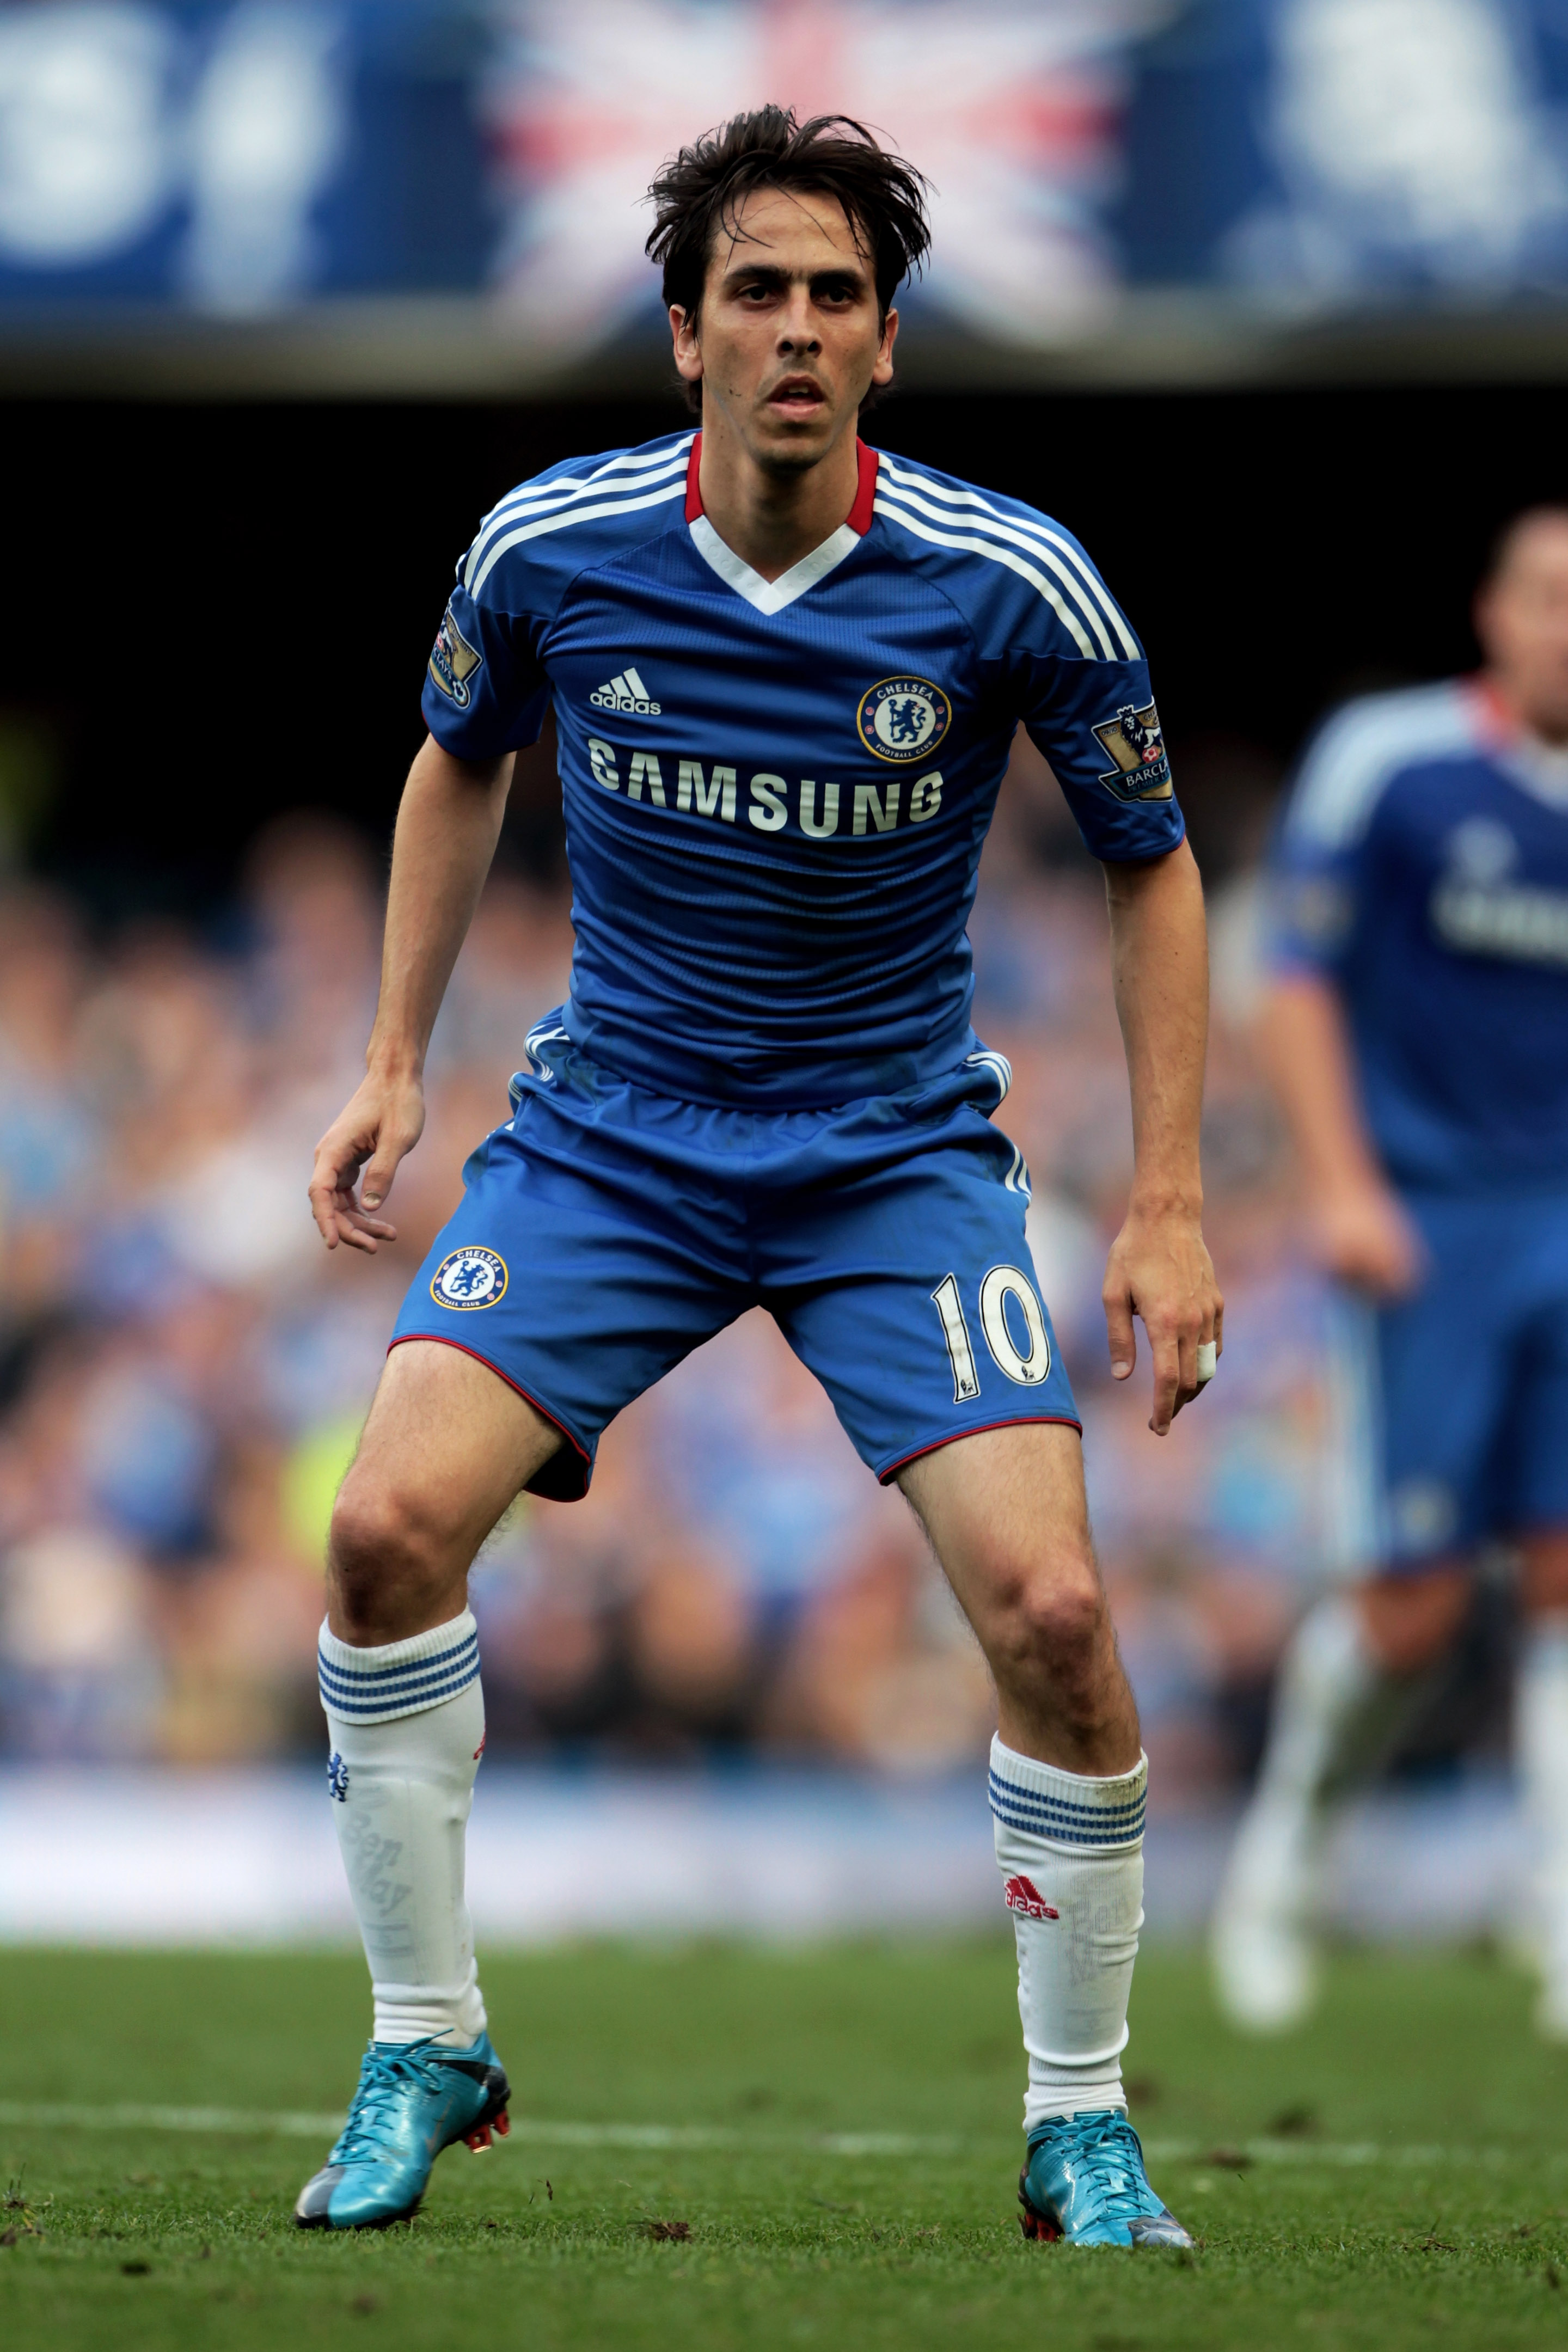 LONDON, ENGLAND - AUGUST 14:  Yossi Benayoun of Chelsea makes his debut during the Barclays Premier League match between Chelsea and West Bromwich Albion at Stamford Bridge on August 14, 2010 in London, England.  (Photo by Phil Cole/Getty Images)